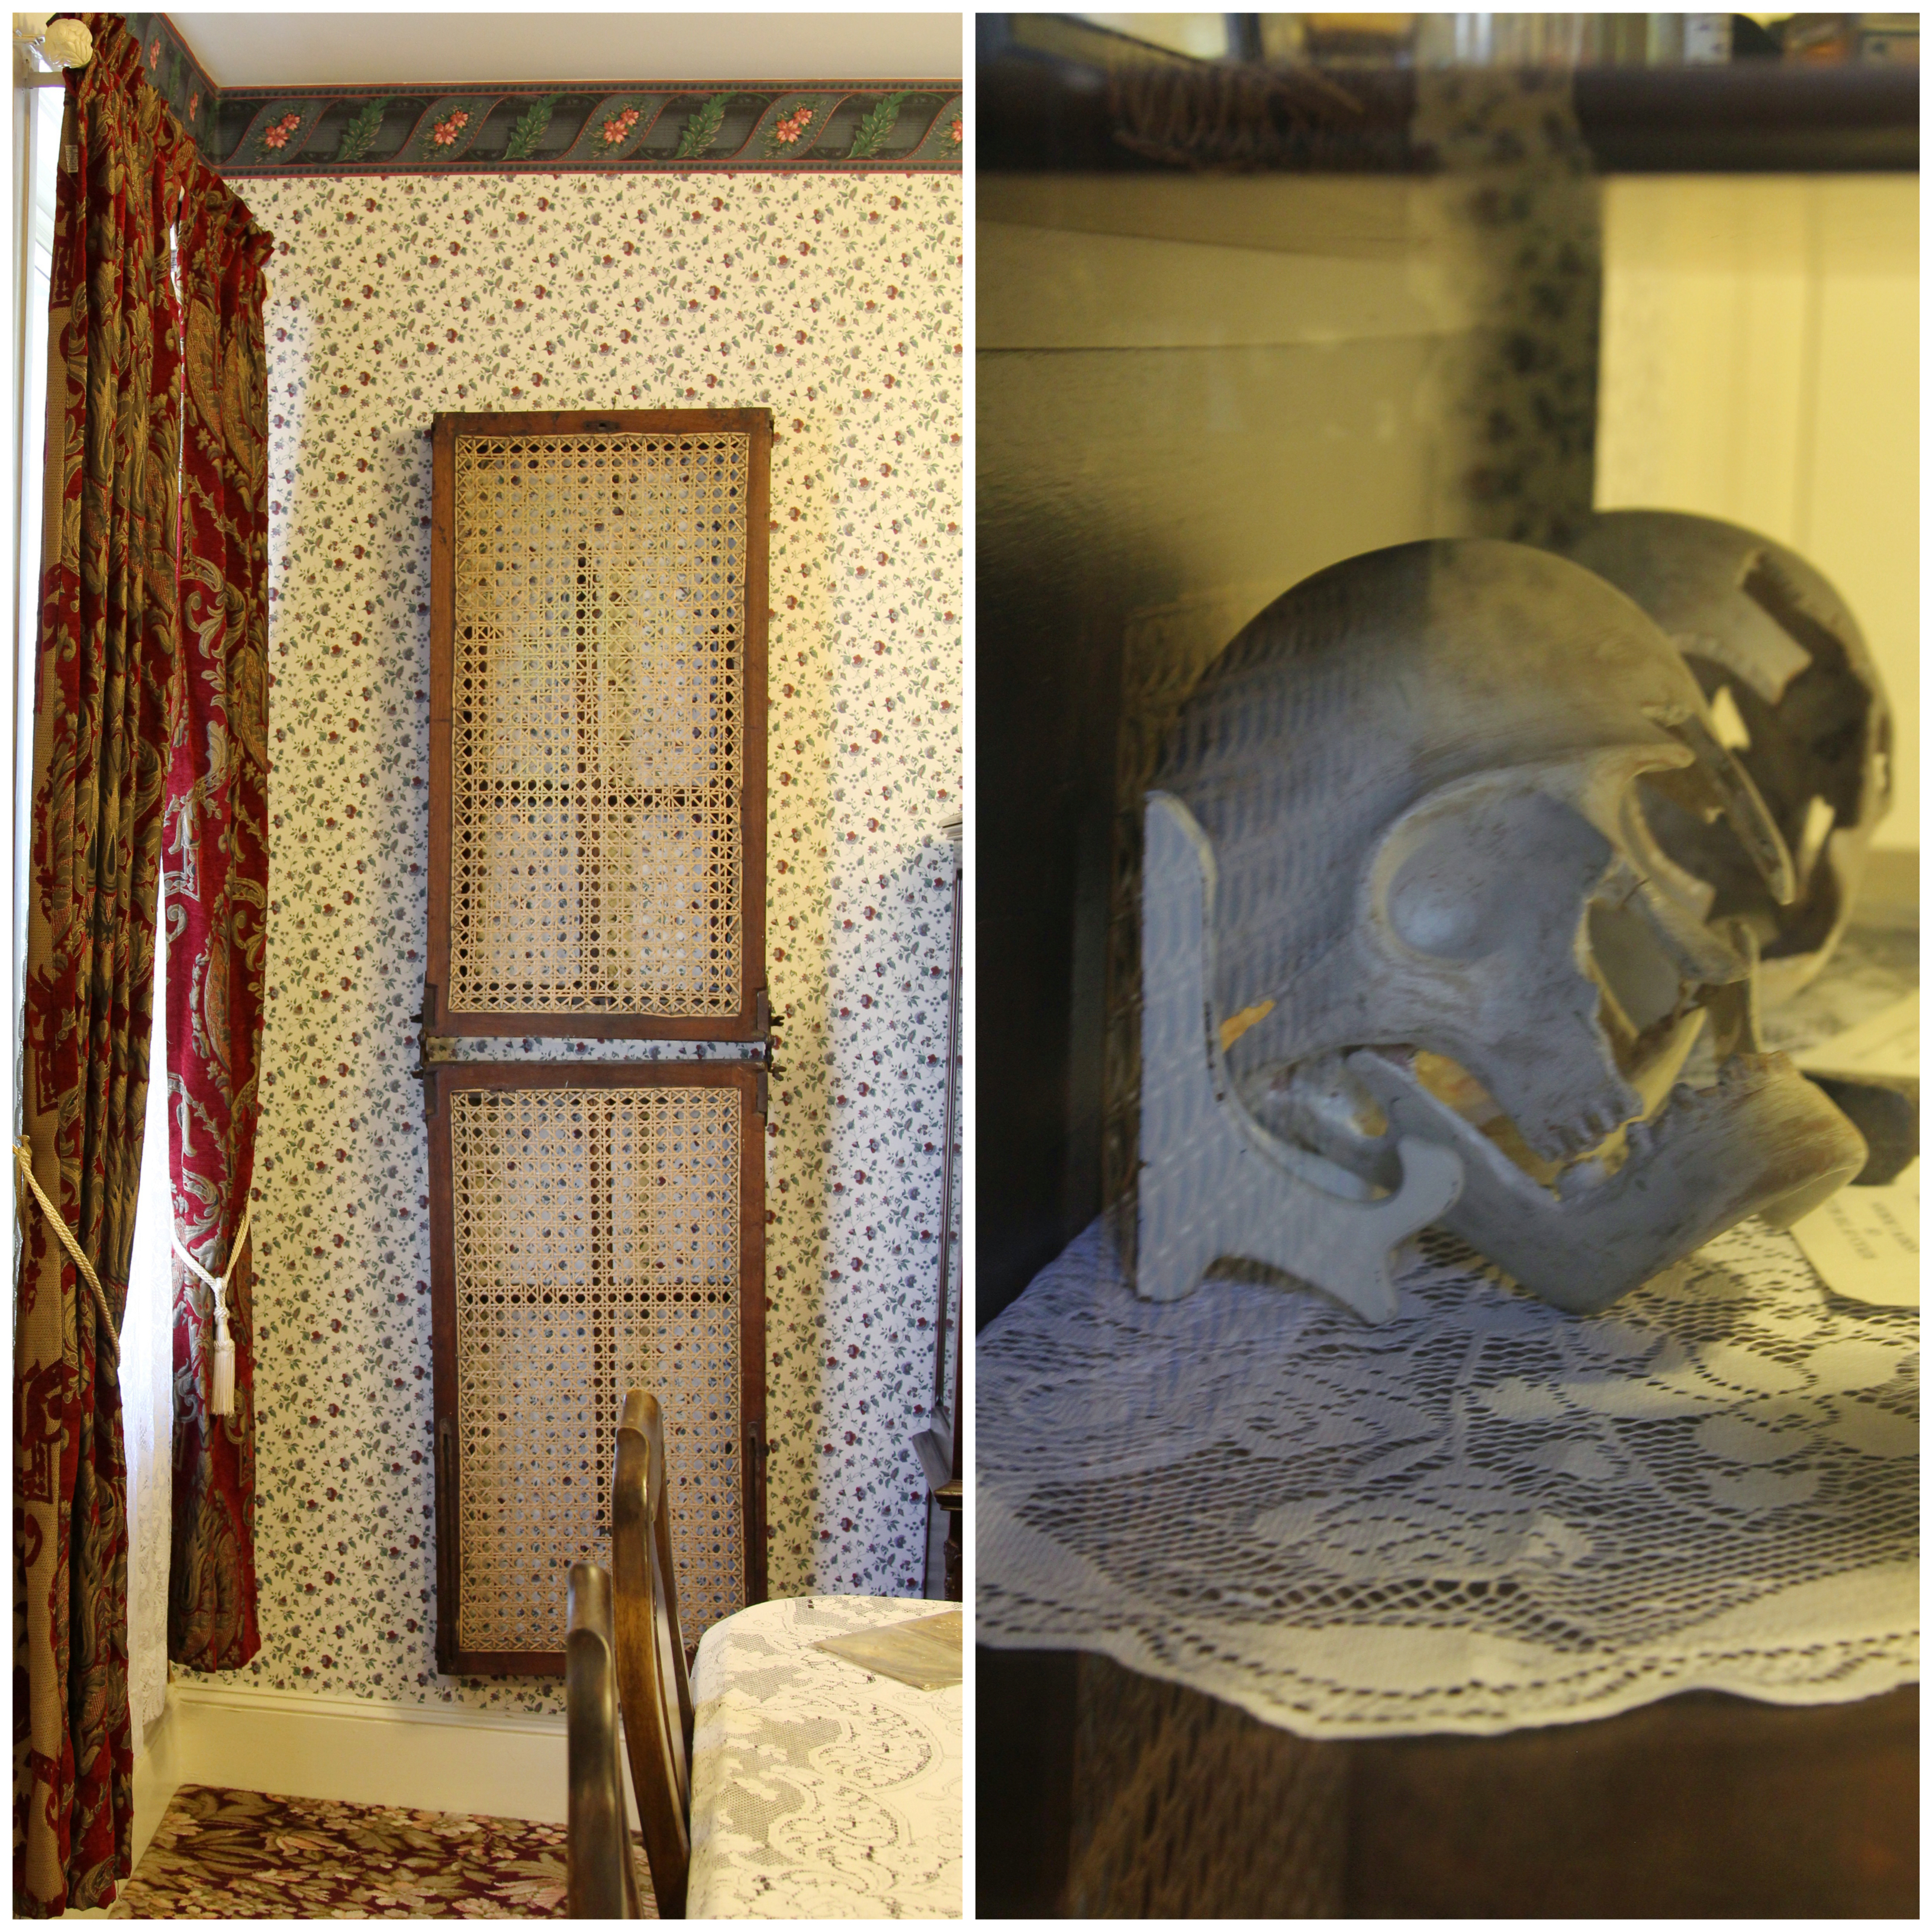 The Lizzie Borden House | Tour the Macabre - New England Today